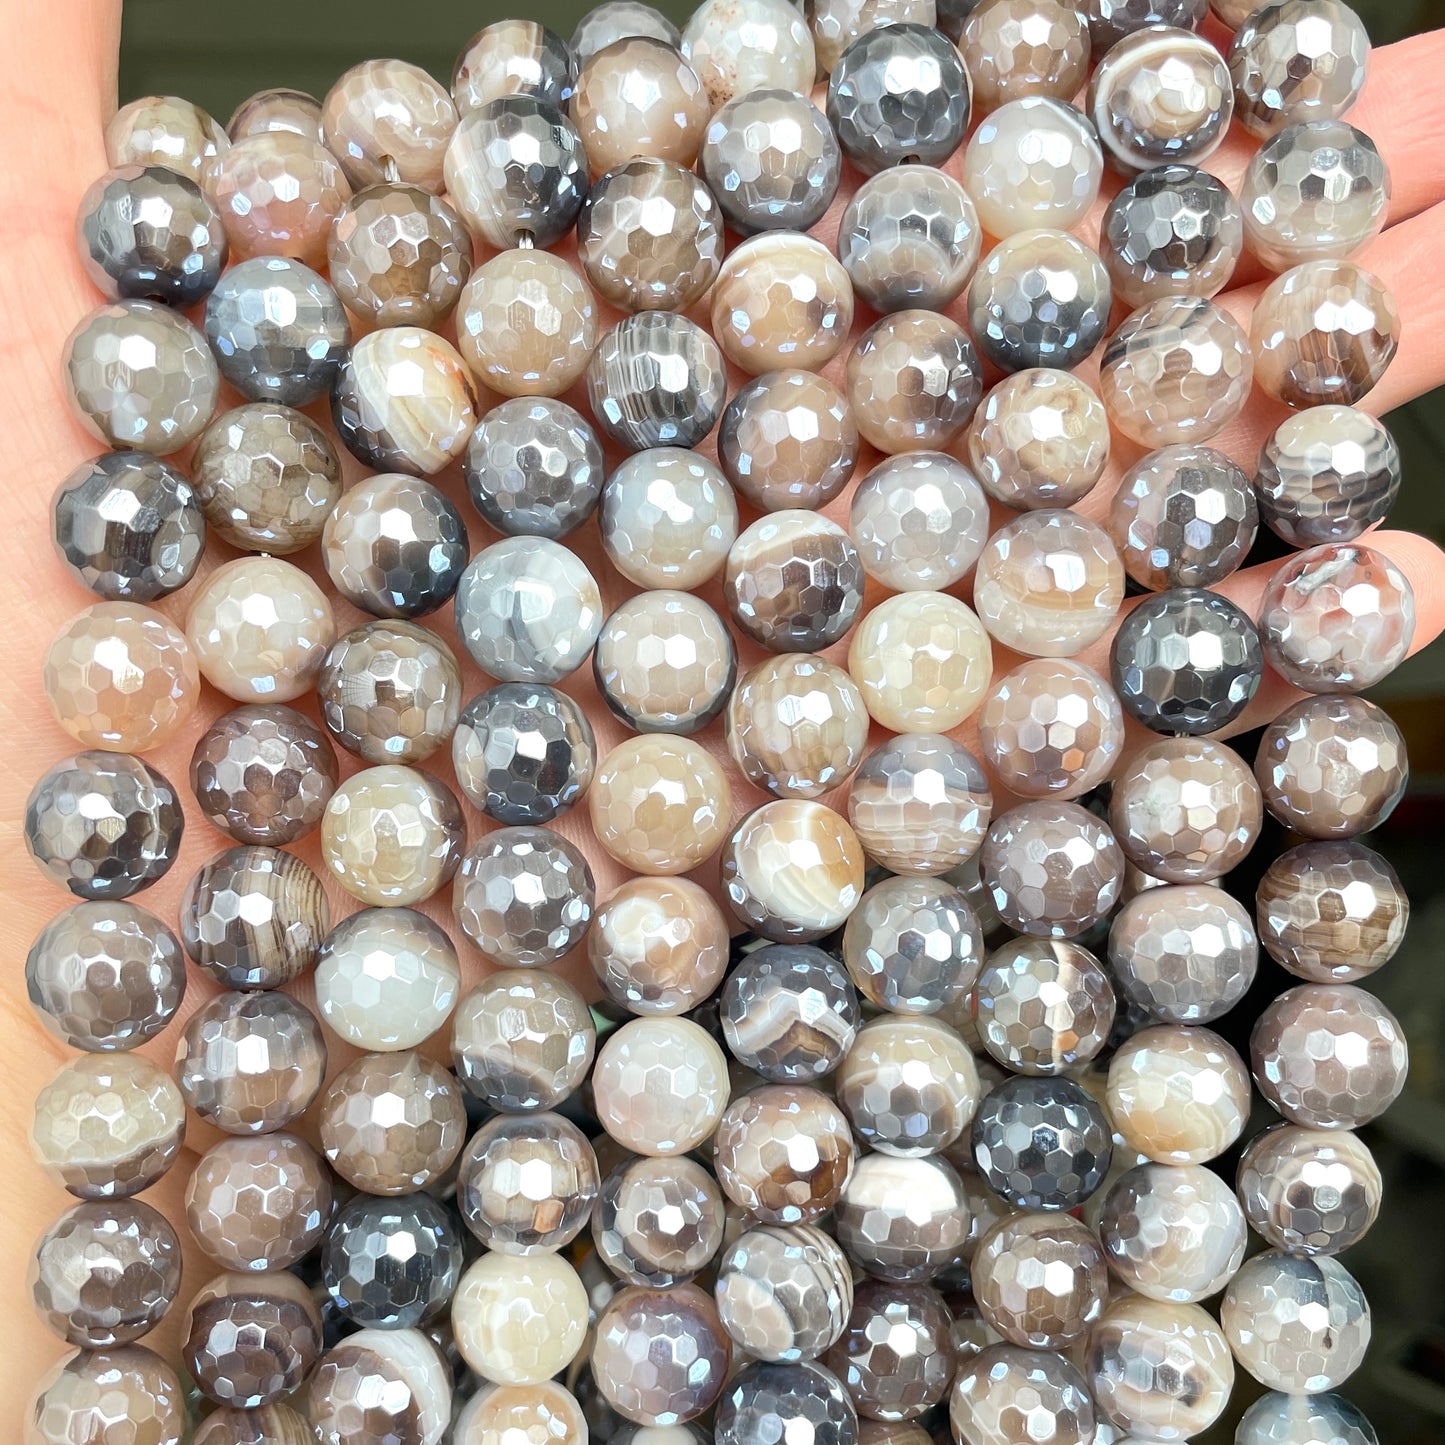 10, 12mm Electroplated Brown Banded Agate Stone Faceted Beads- Grade A Premium Quality Electroplated Beads 12mm Stone Beads New Beads Arrivals Premium Quality Agate Beads Charms Beads Beyond